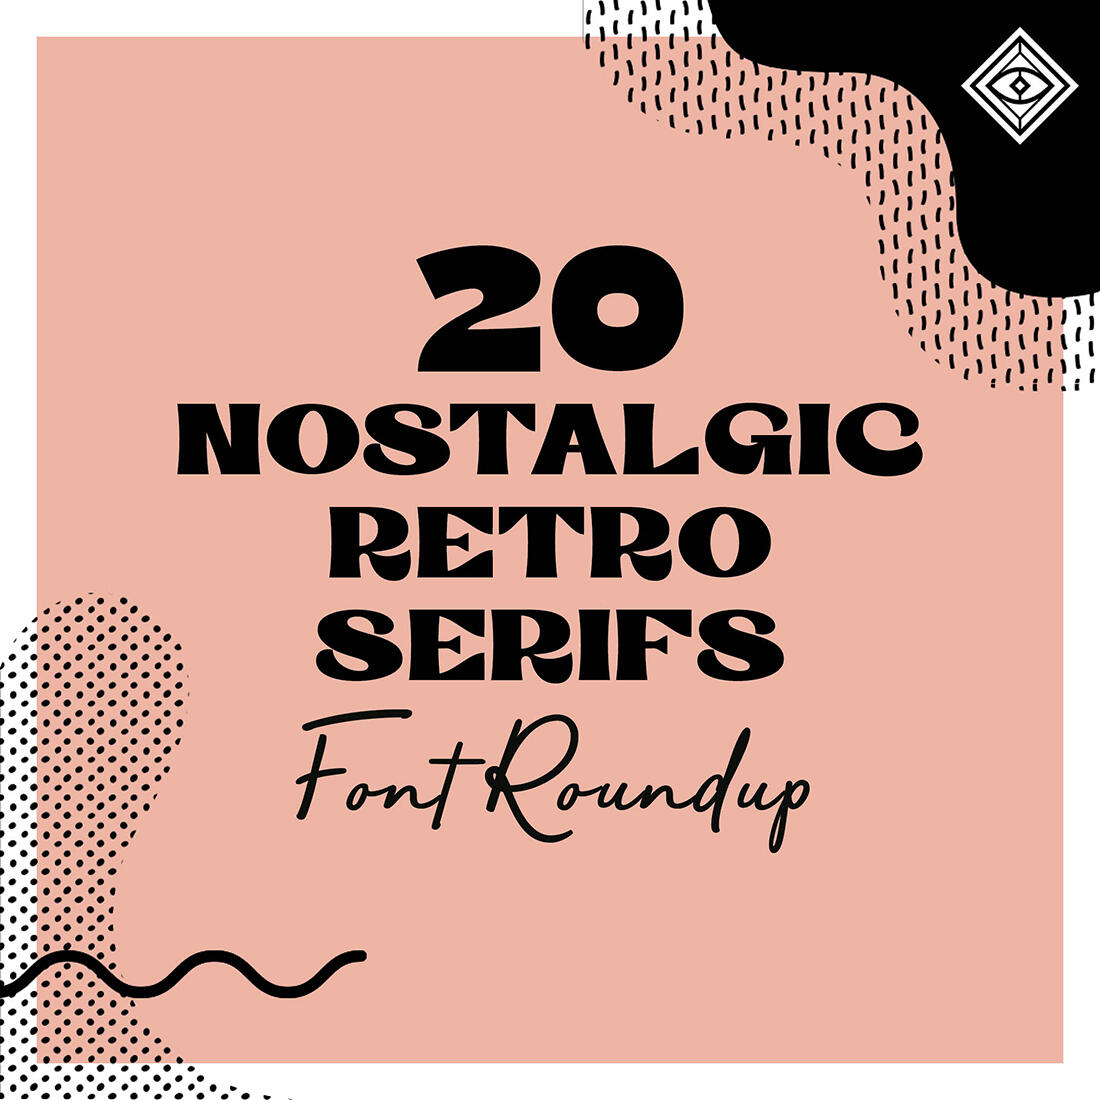 20 Super Timely Retro Serif Fonts • Little Gold Pixel • 20 retro serif fonts that will take you back to the 1980s and 1990s. These fonts are bold and eye-catching, perfect for your nostalgic designs.